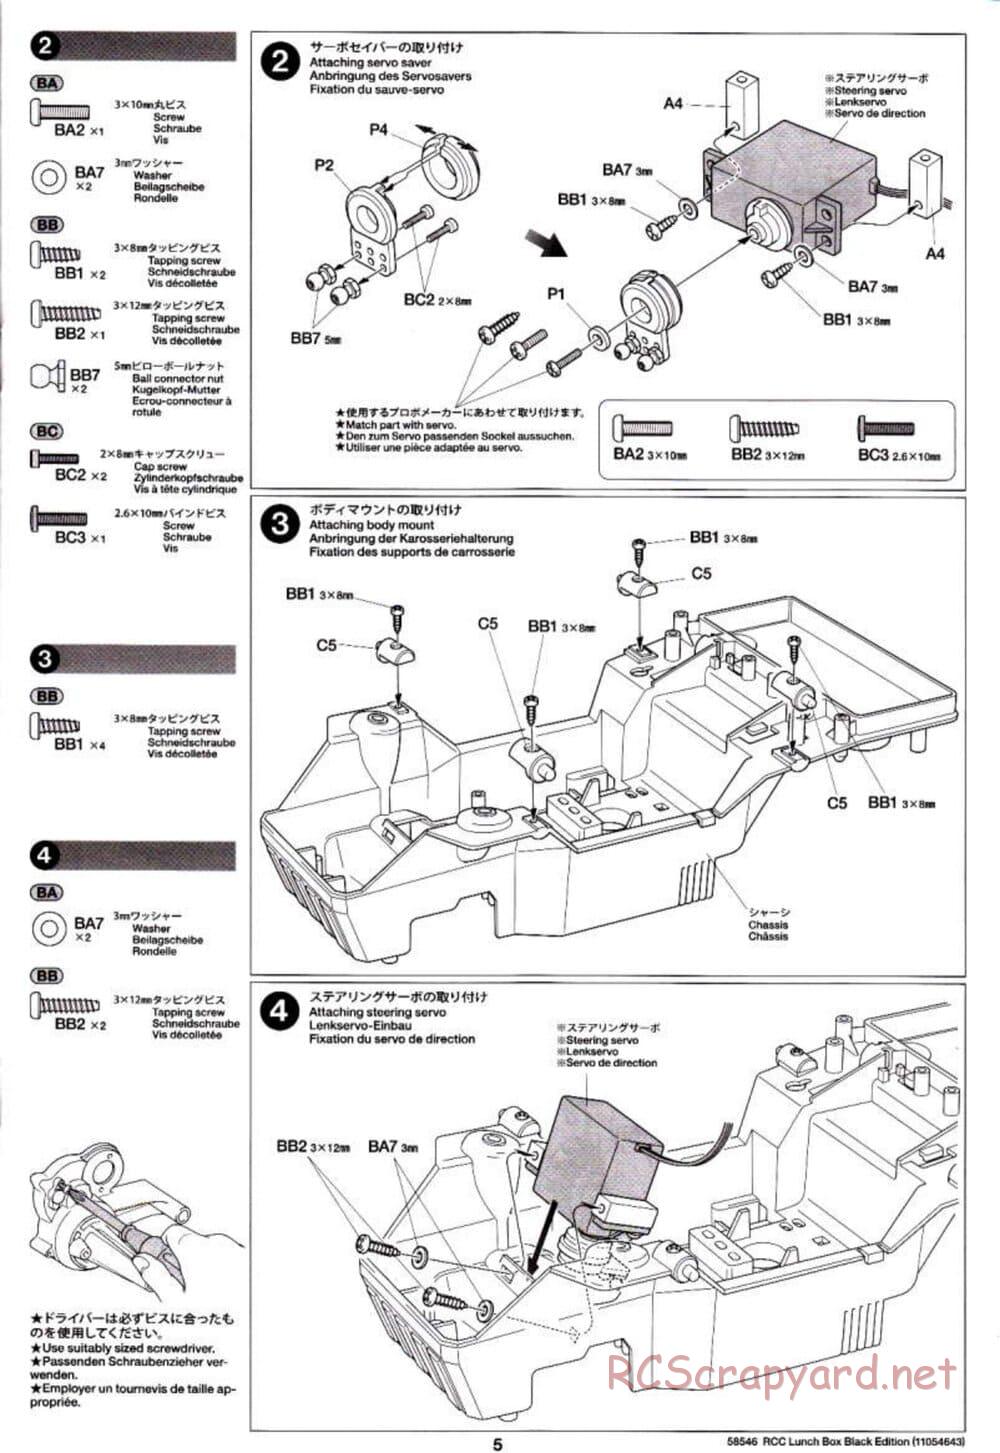 Tamiya - Lunch Box - Black Edition - CW-01 Chassis - Manual - Page 5